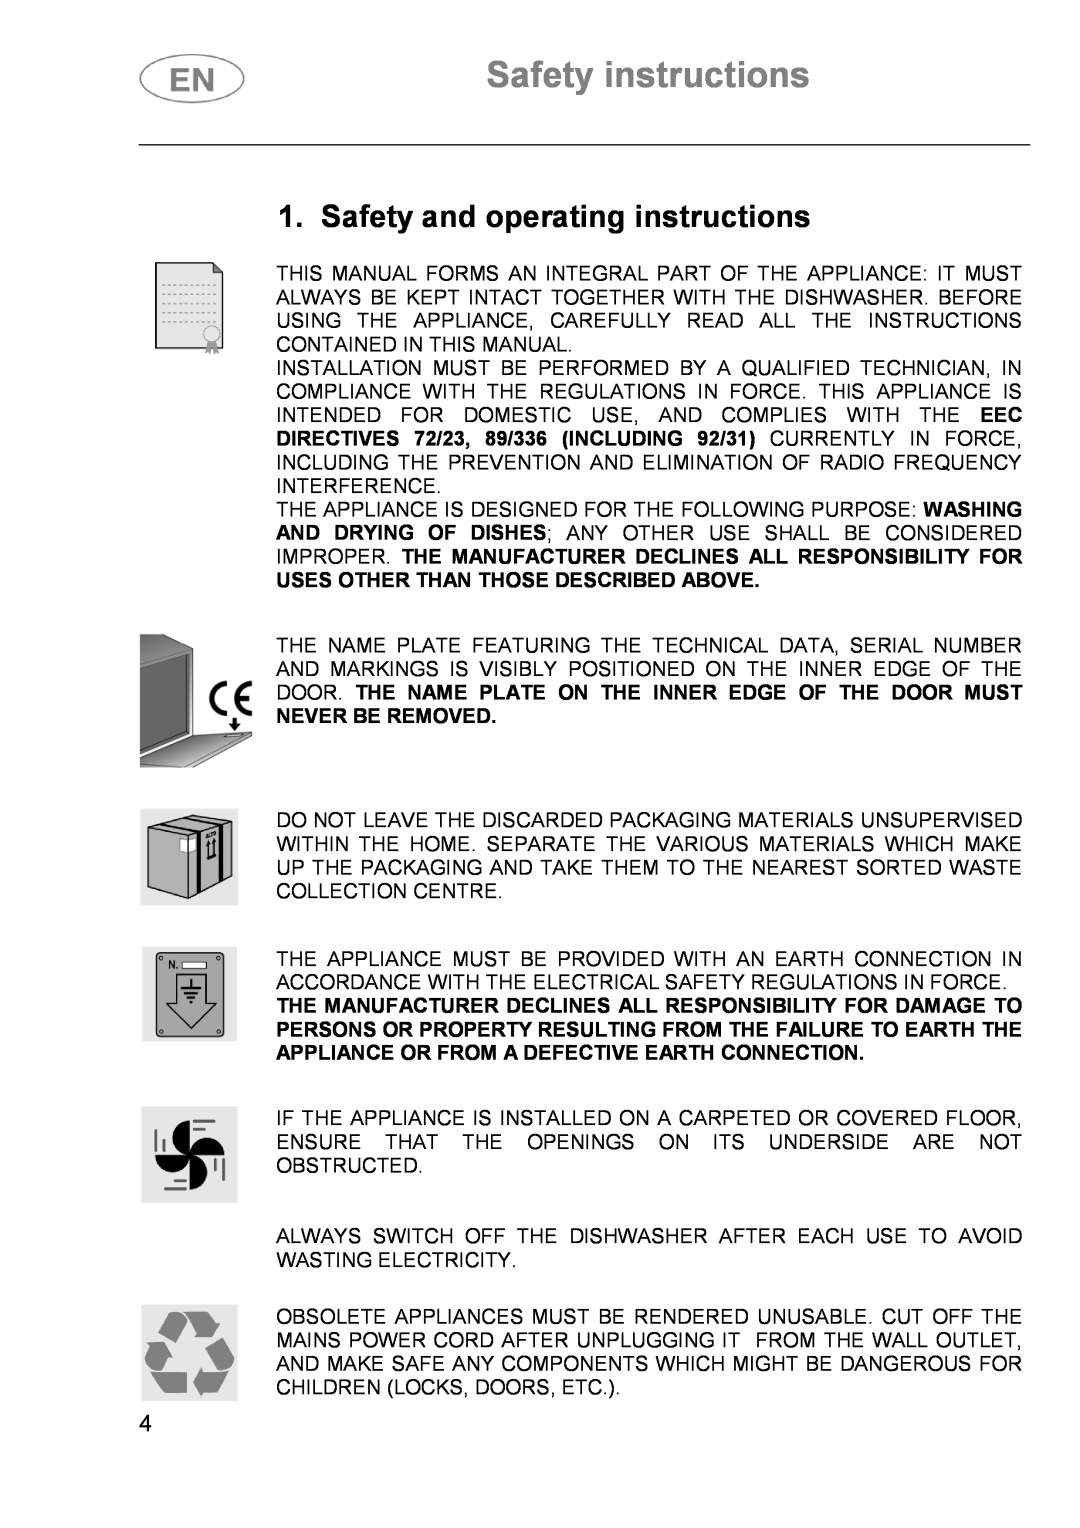 Smeg DI614H Safety instructions, Safety and operating instructions, Uses Other Than Those Described Above 